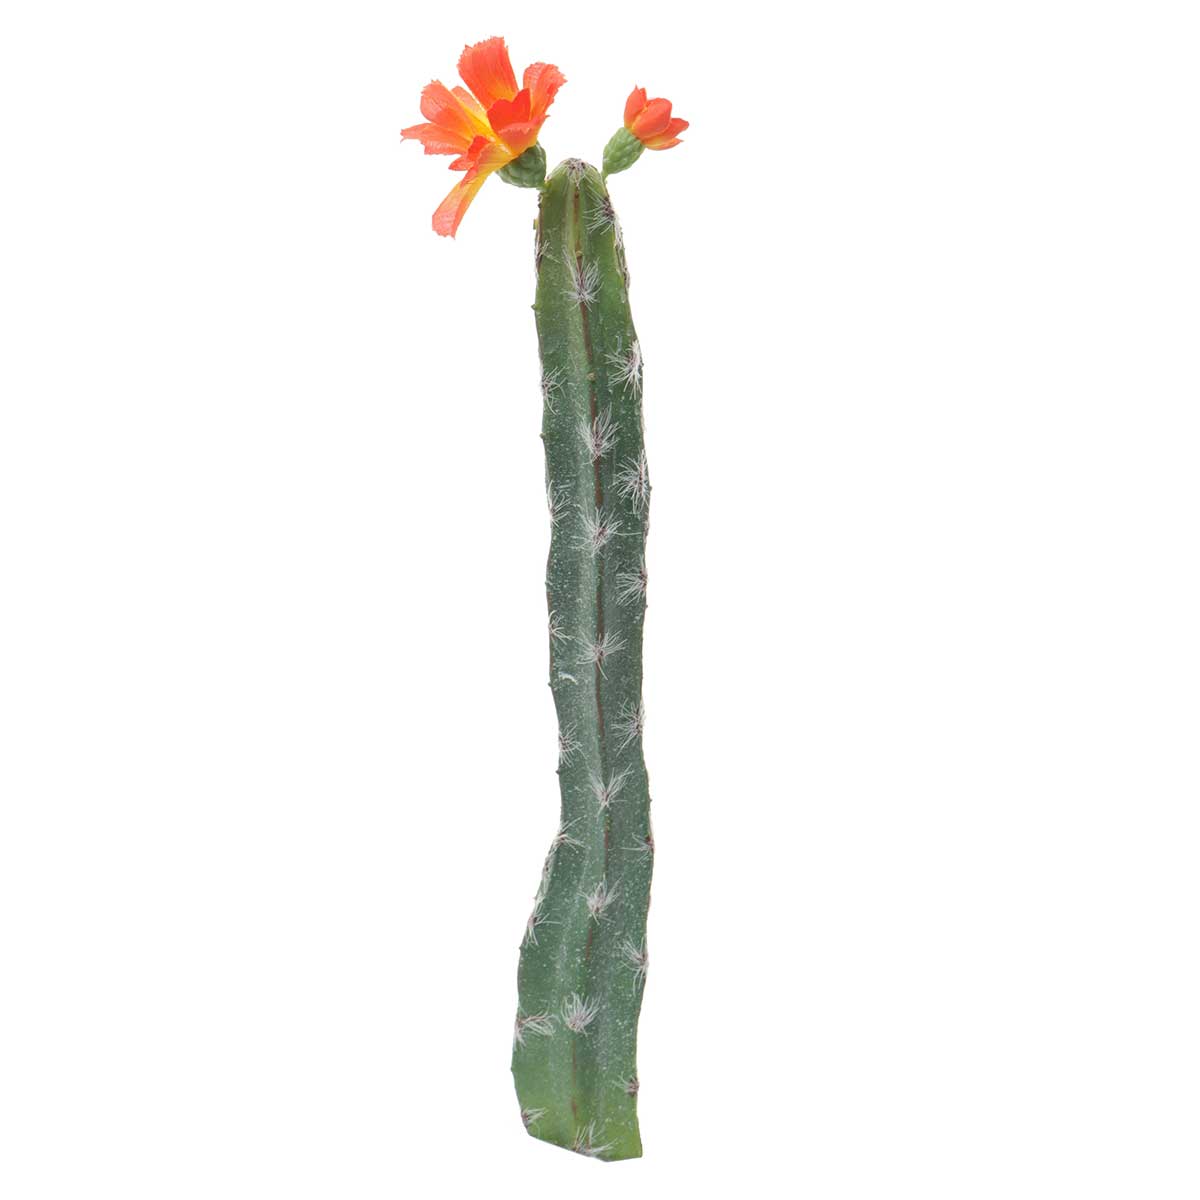 CACTUS WITH FLOWER 2.75"X14" b70